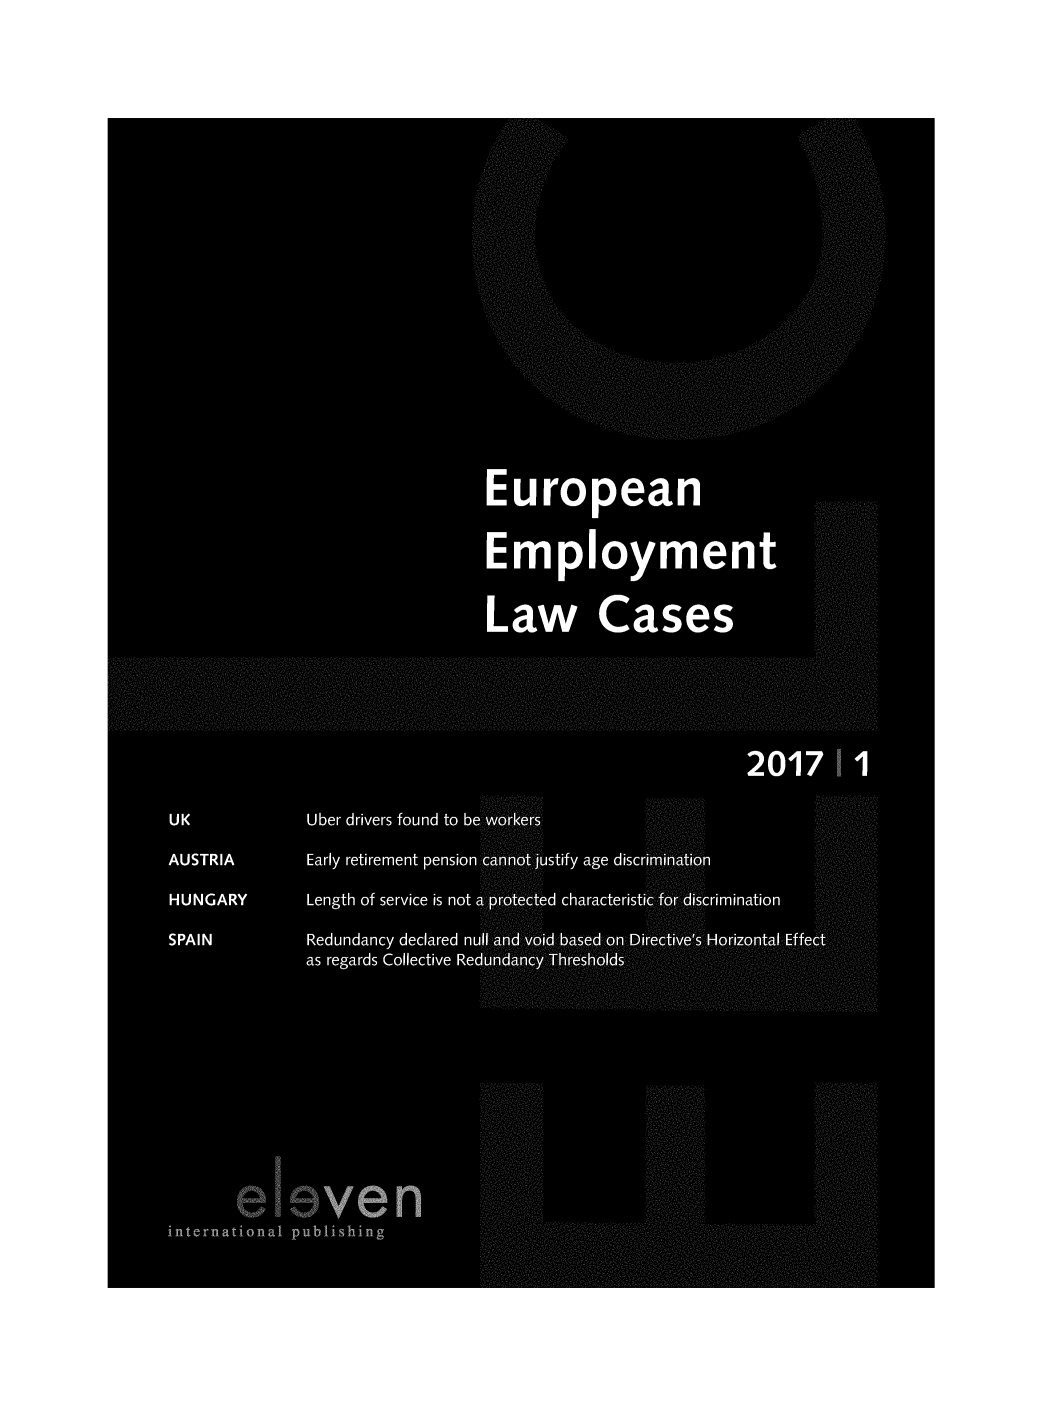 handle is hein.journals/eelc2017 and id is 1 raw text is:                                  zz.                                                                    ss,                              is :s                                                                 4.                                   0                                                                   2.                                      . . . . . . . . .                                     . . . . . . . . . . . . . . . .                                            ...... . . . . . .                               European                               Employment                               Law Cases                                                        2017      1U K          Uber drivers found to beW'd tk .O'j                                  ,rsAUSTRIA      Early retirement pension ca indtJustify age discriMMAtibnHUNGARY      Length of service is not a#Jbf ded characteristi q,.,;...;Q:r,..,.,,..d.,I.scri m inationSPAIN        Redundancy declared nu1['-4hd,,' id basedson Die6d.tJ:`!'i's. orizo             as re ards Collective Re       eleveninternational publishing                                       . . . . . . . . ....